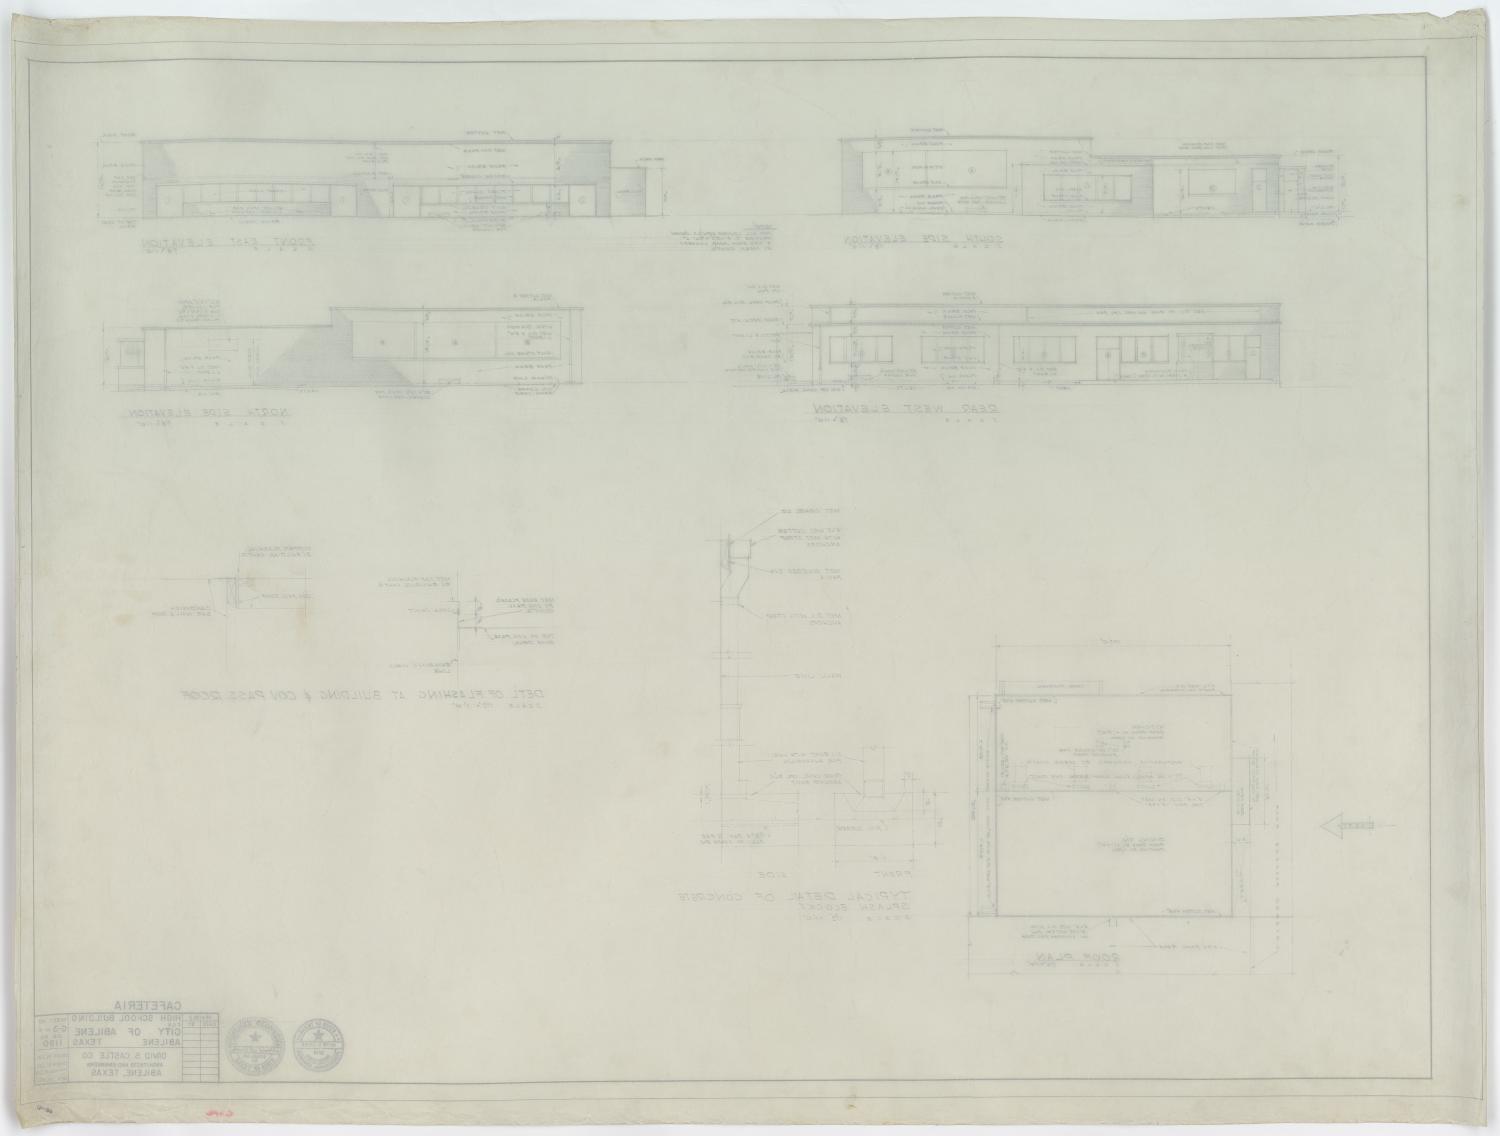 High School Cafeteria Abilene, Texas: Roof Plan & Building Elevation Directions
                                                
                                                    [Sequence #]: 2 of 2
                                                